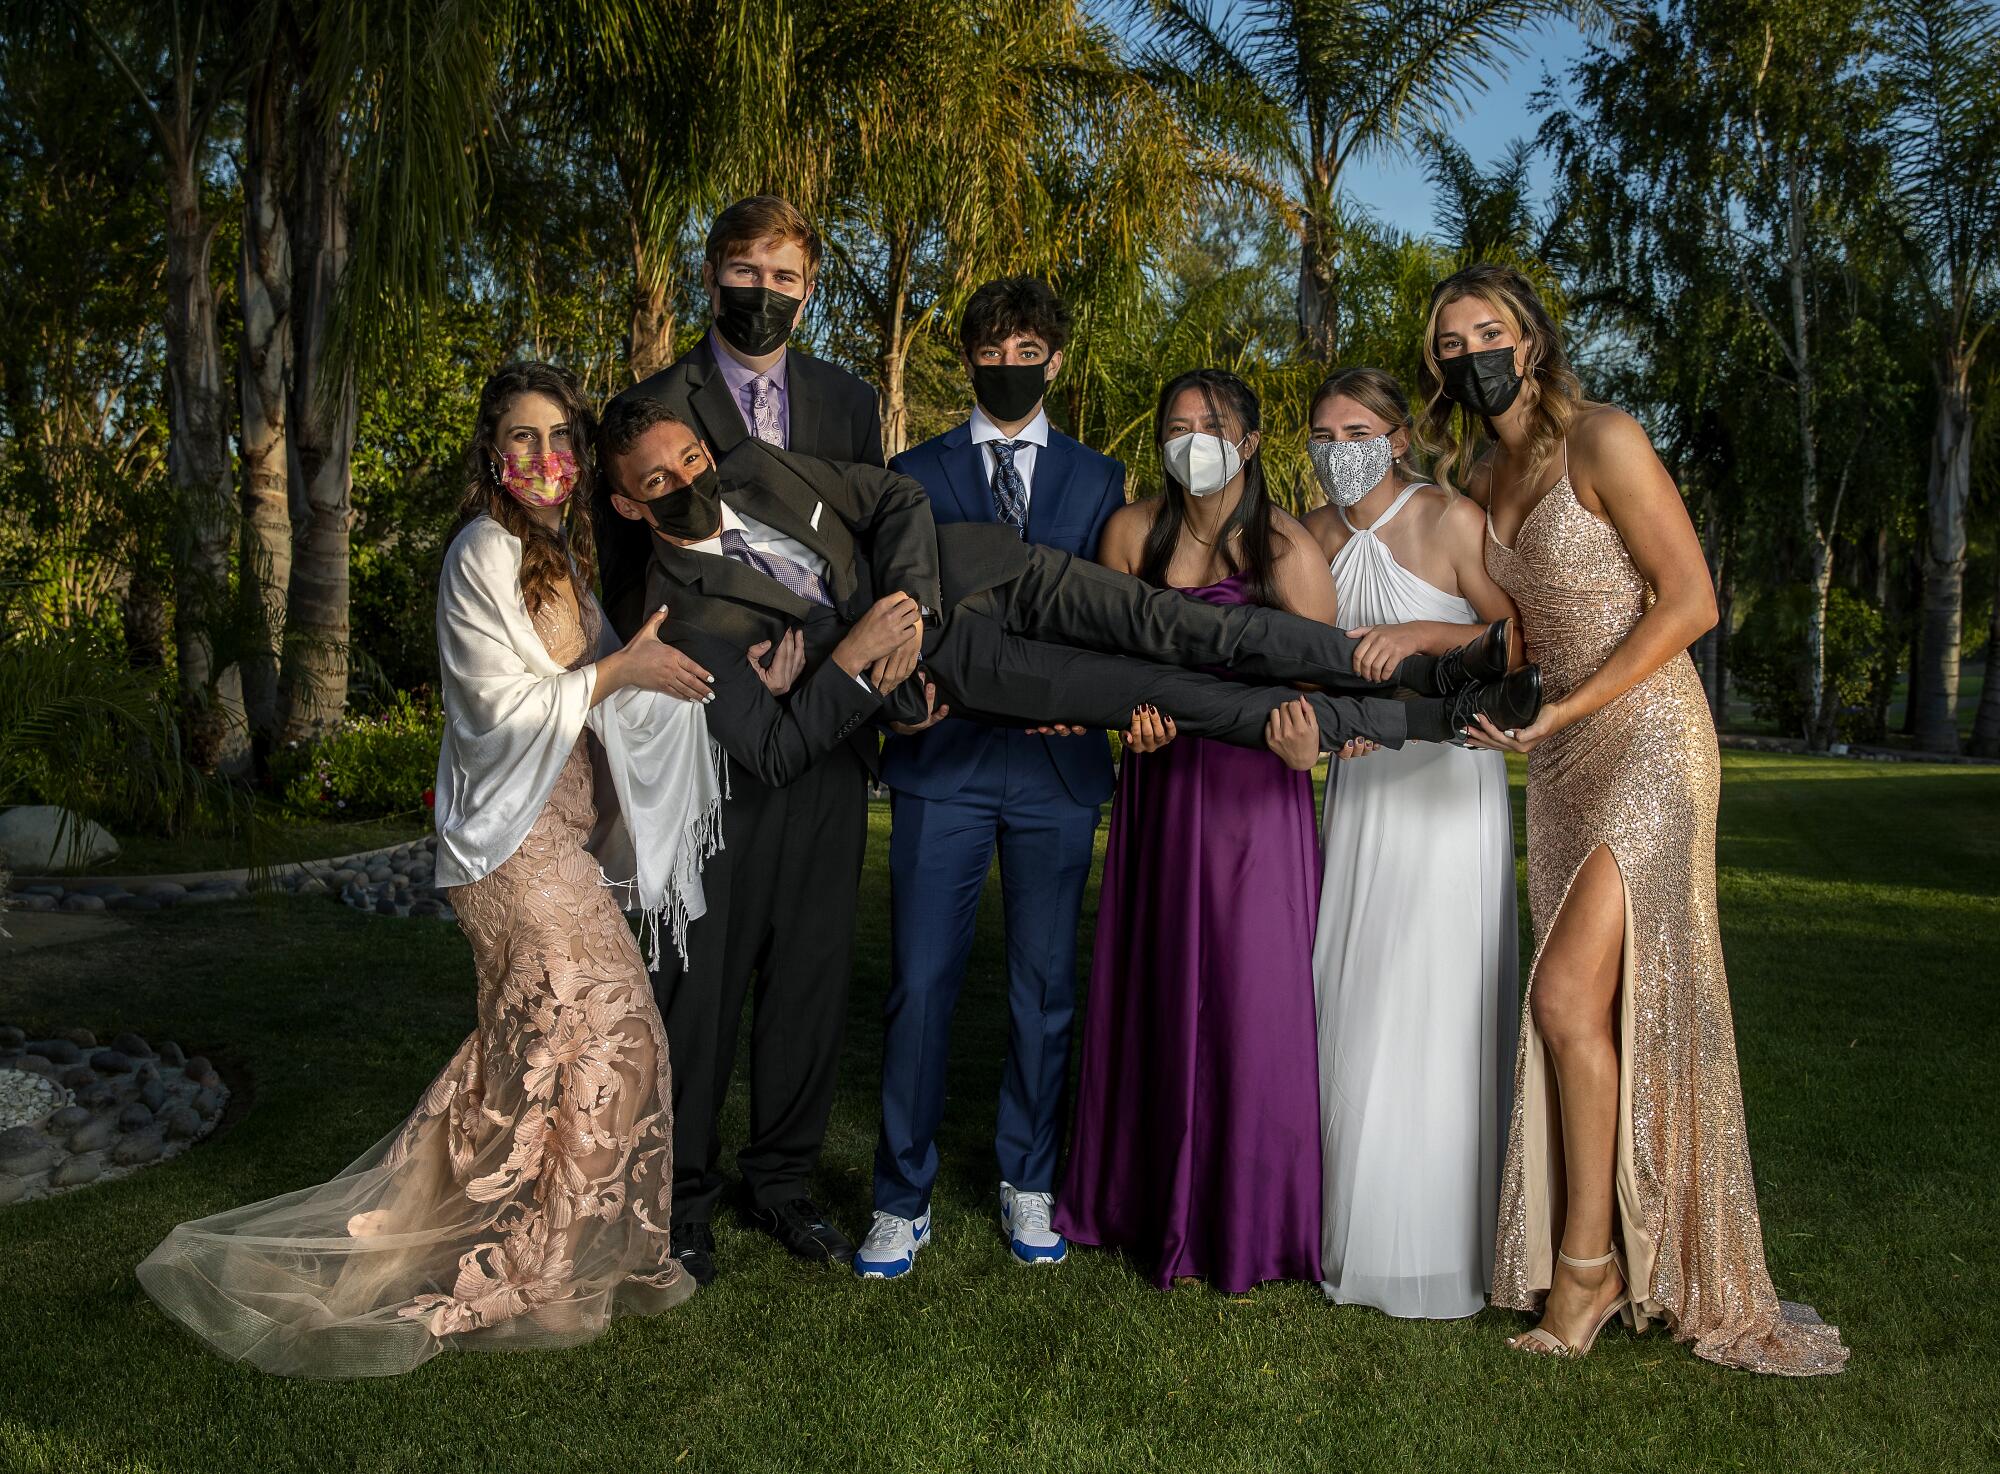 Students in prom attire pose for a photo holding one of their friends and wearing masks